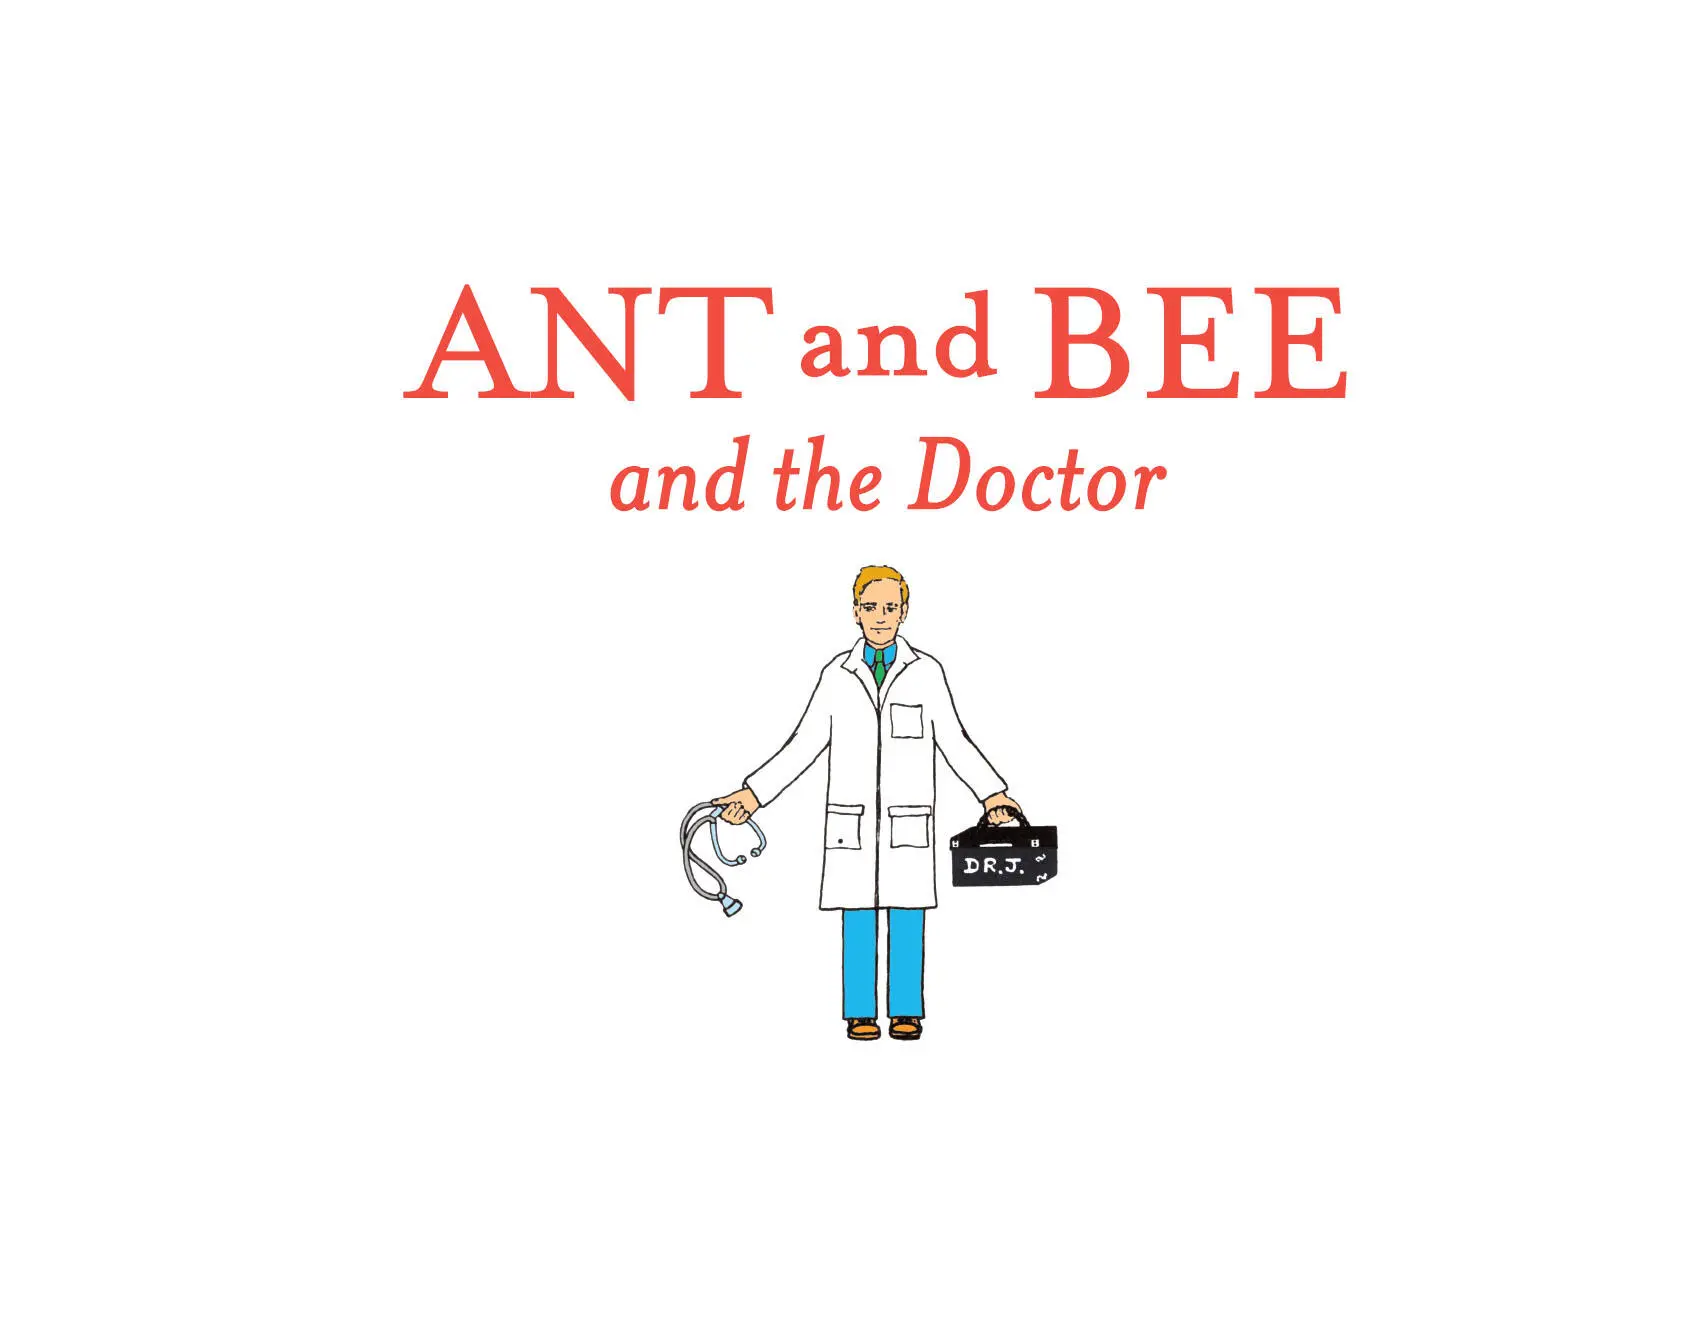 ANT and BEE and the Doctor is dedicated to all children who are ill and my - фото 1